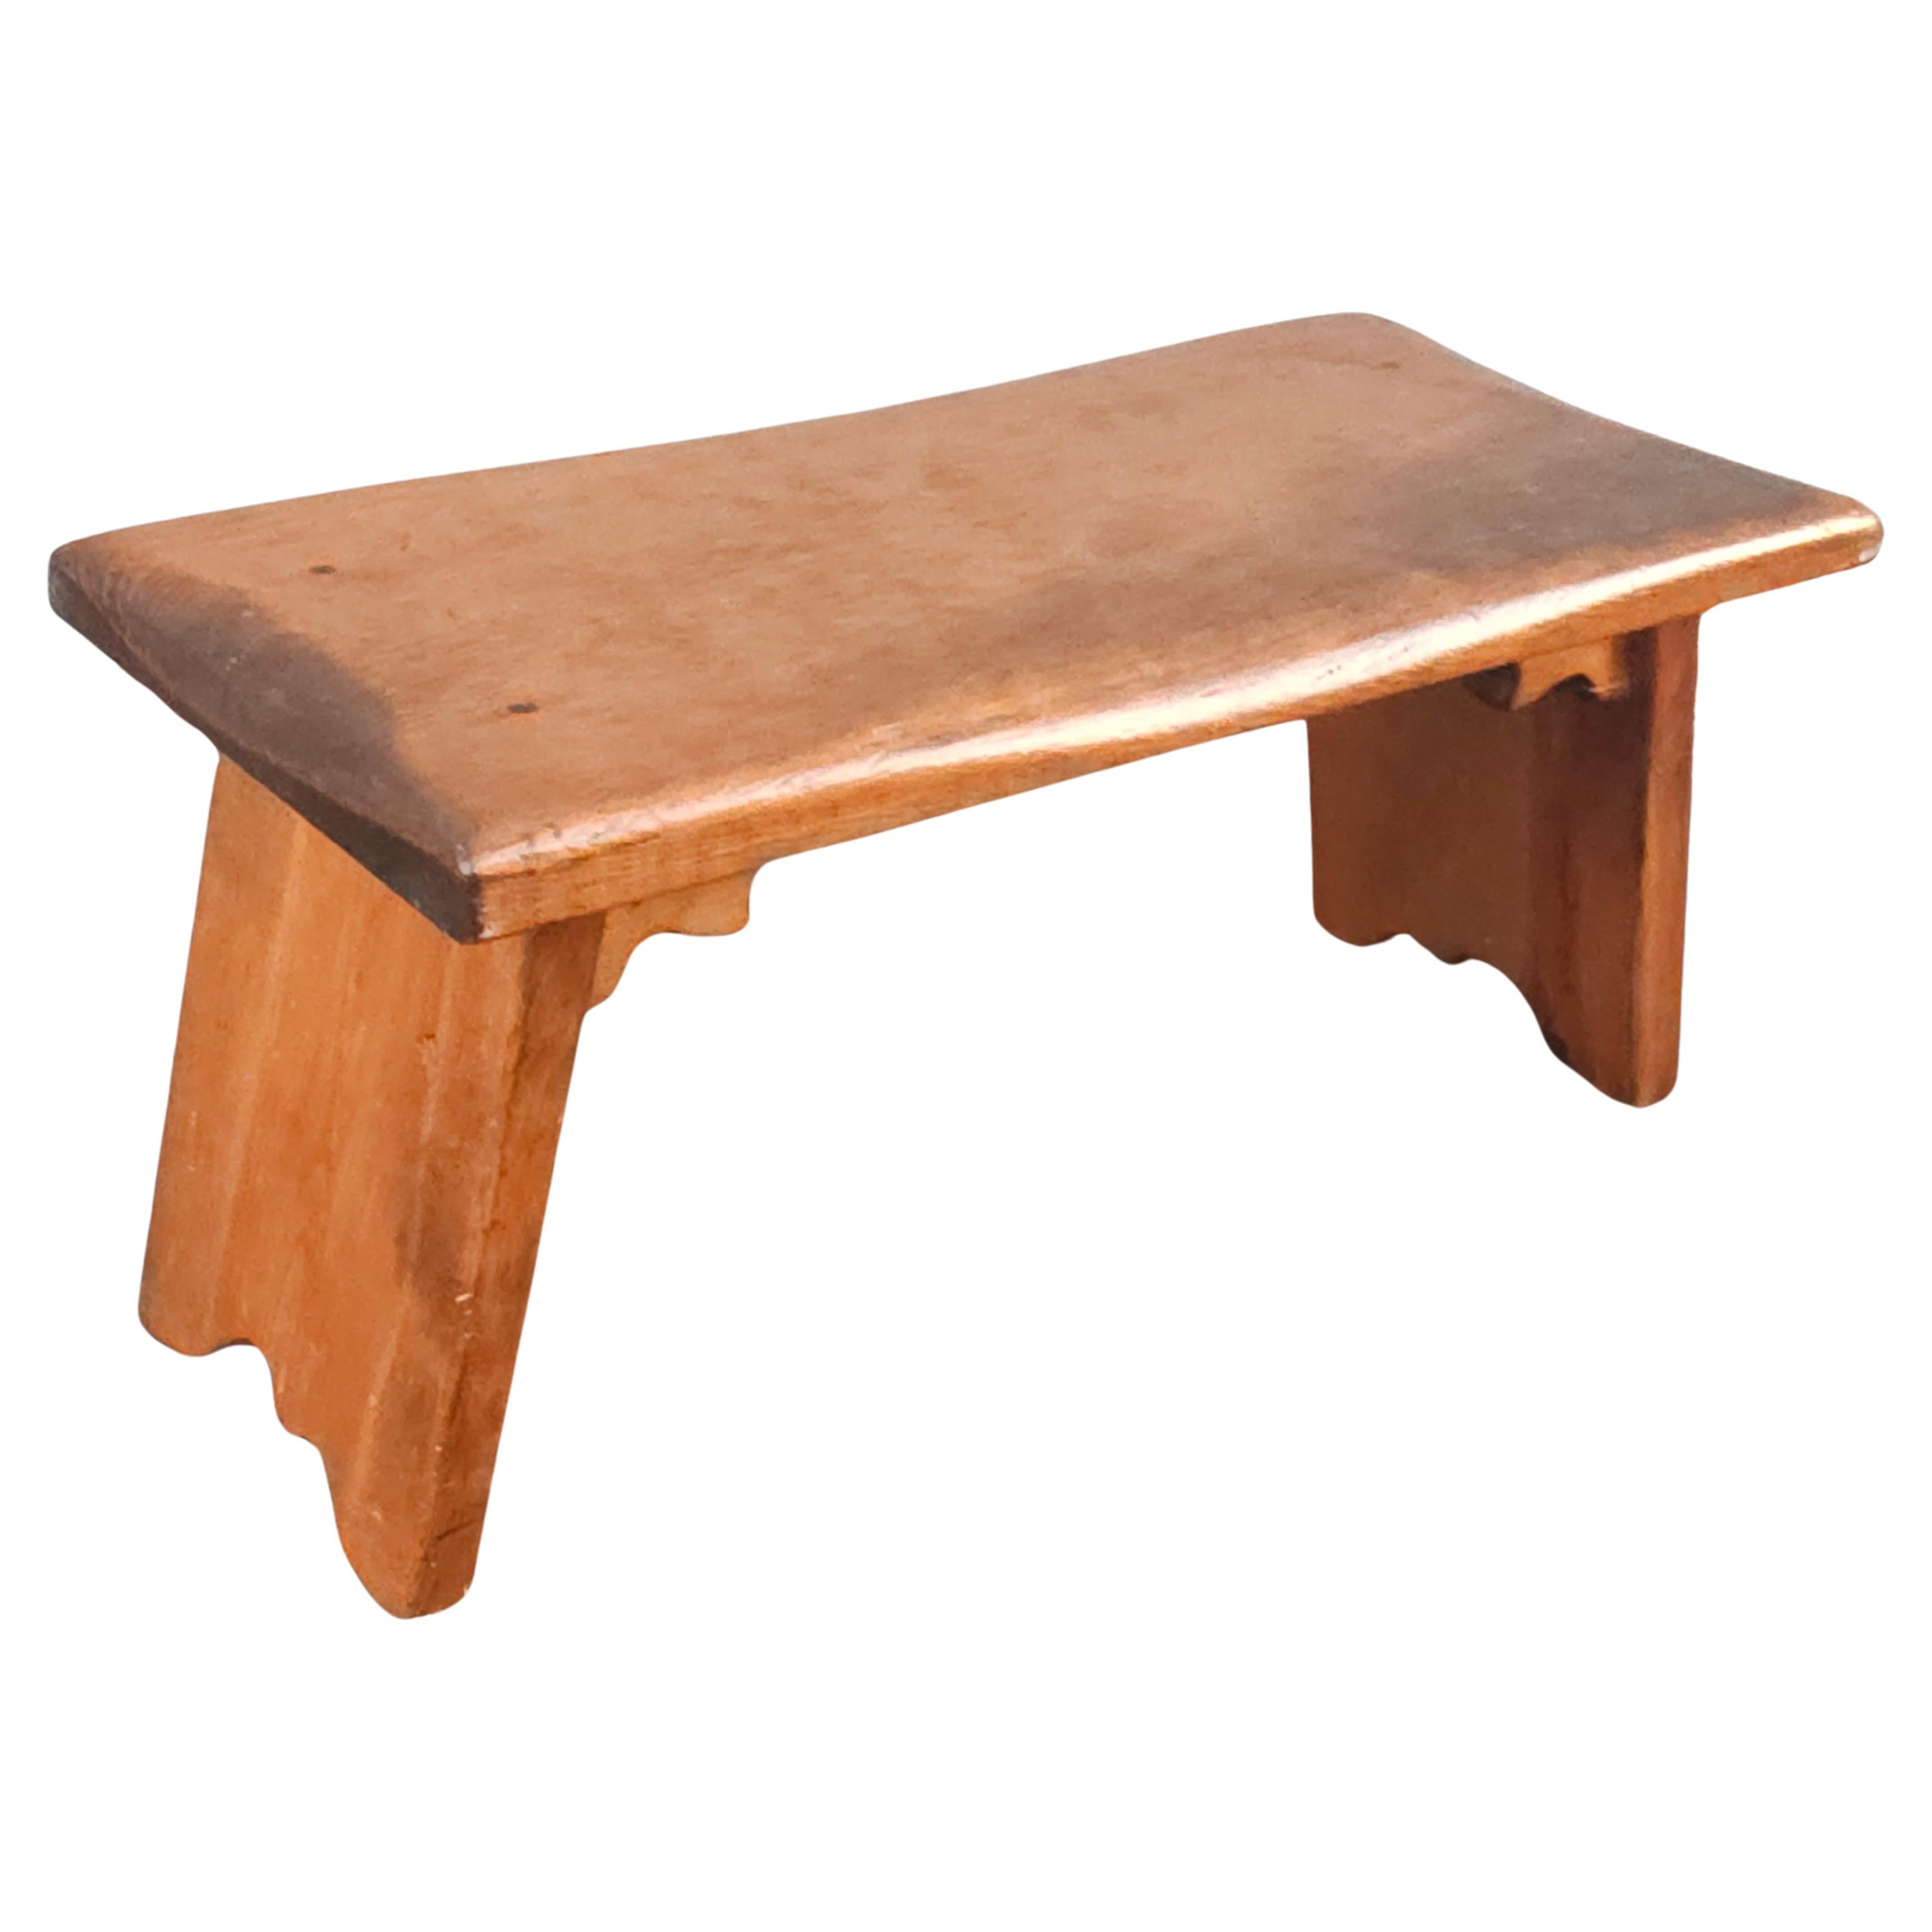 Early American Style Low Bench or Footstool 